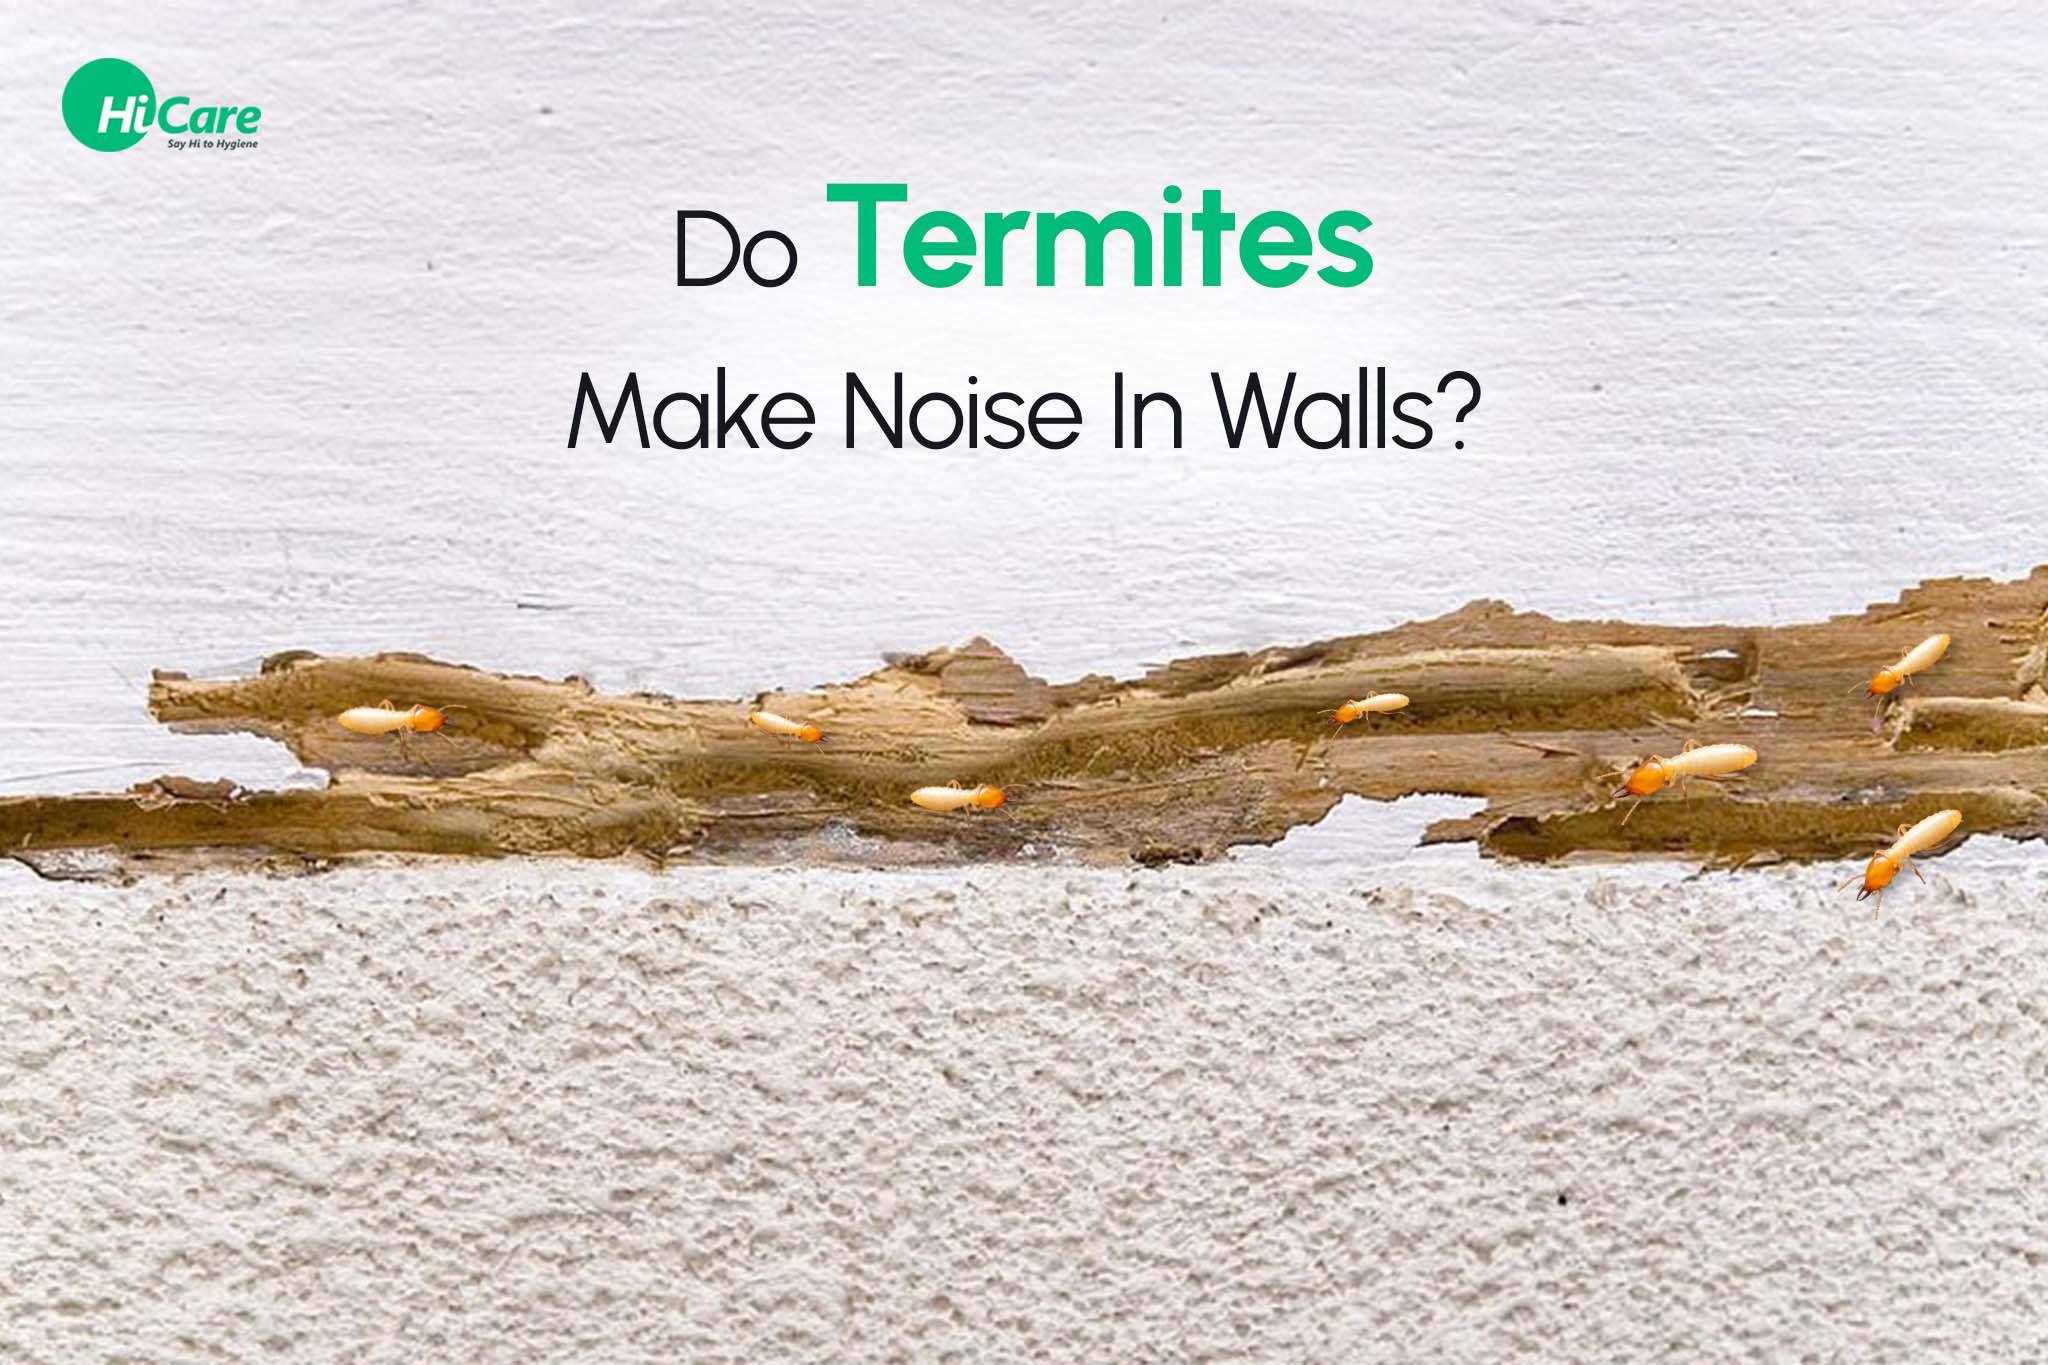 Do Termites Make Noise in the Walls?